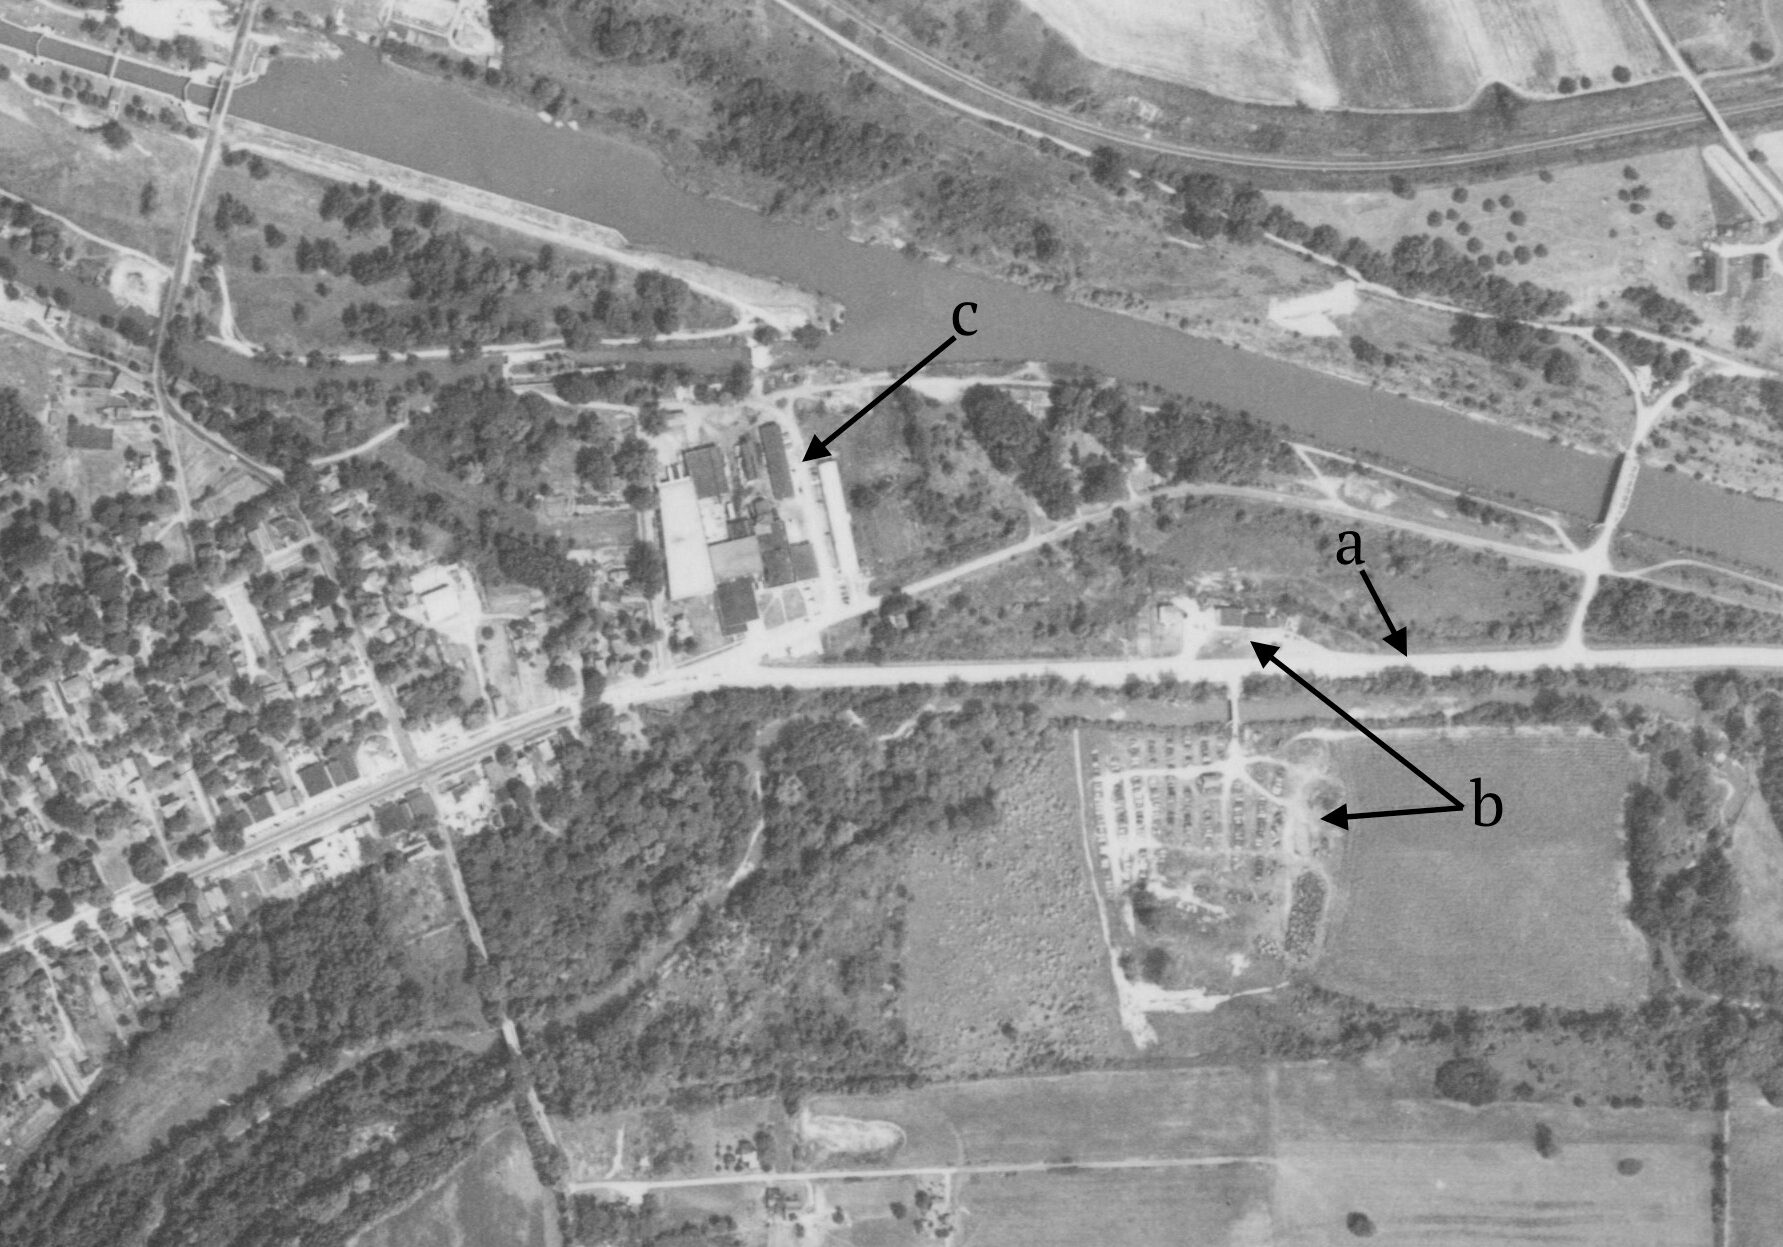 An aerial view of Route 31 in 1954